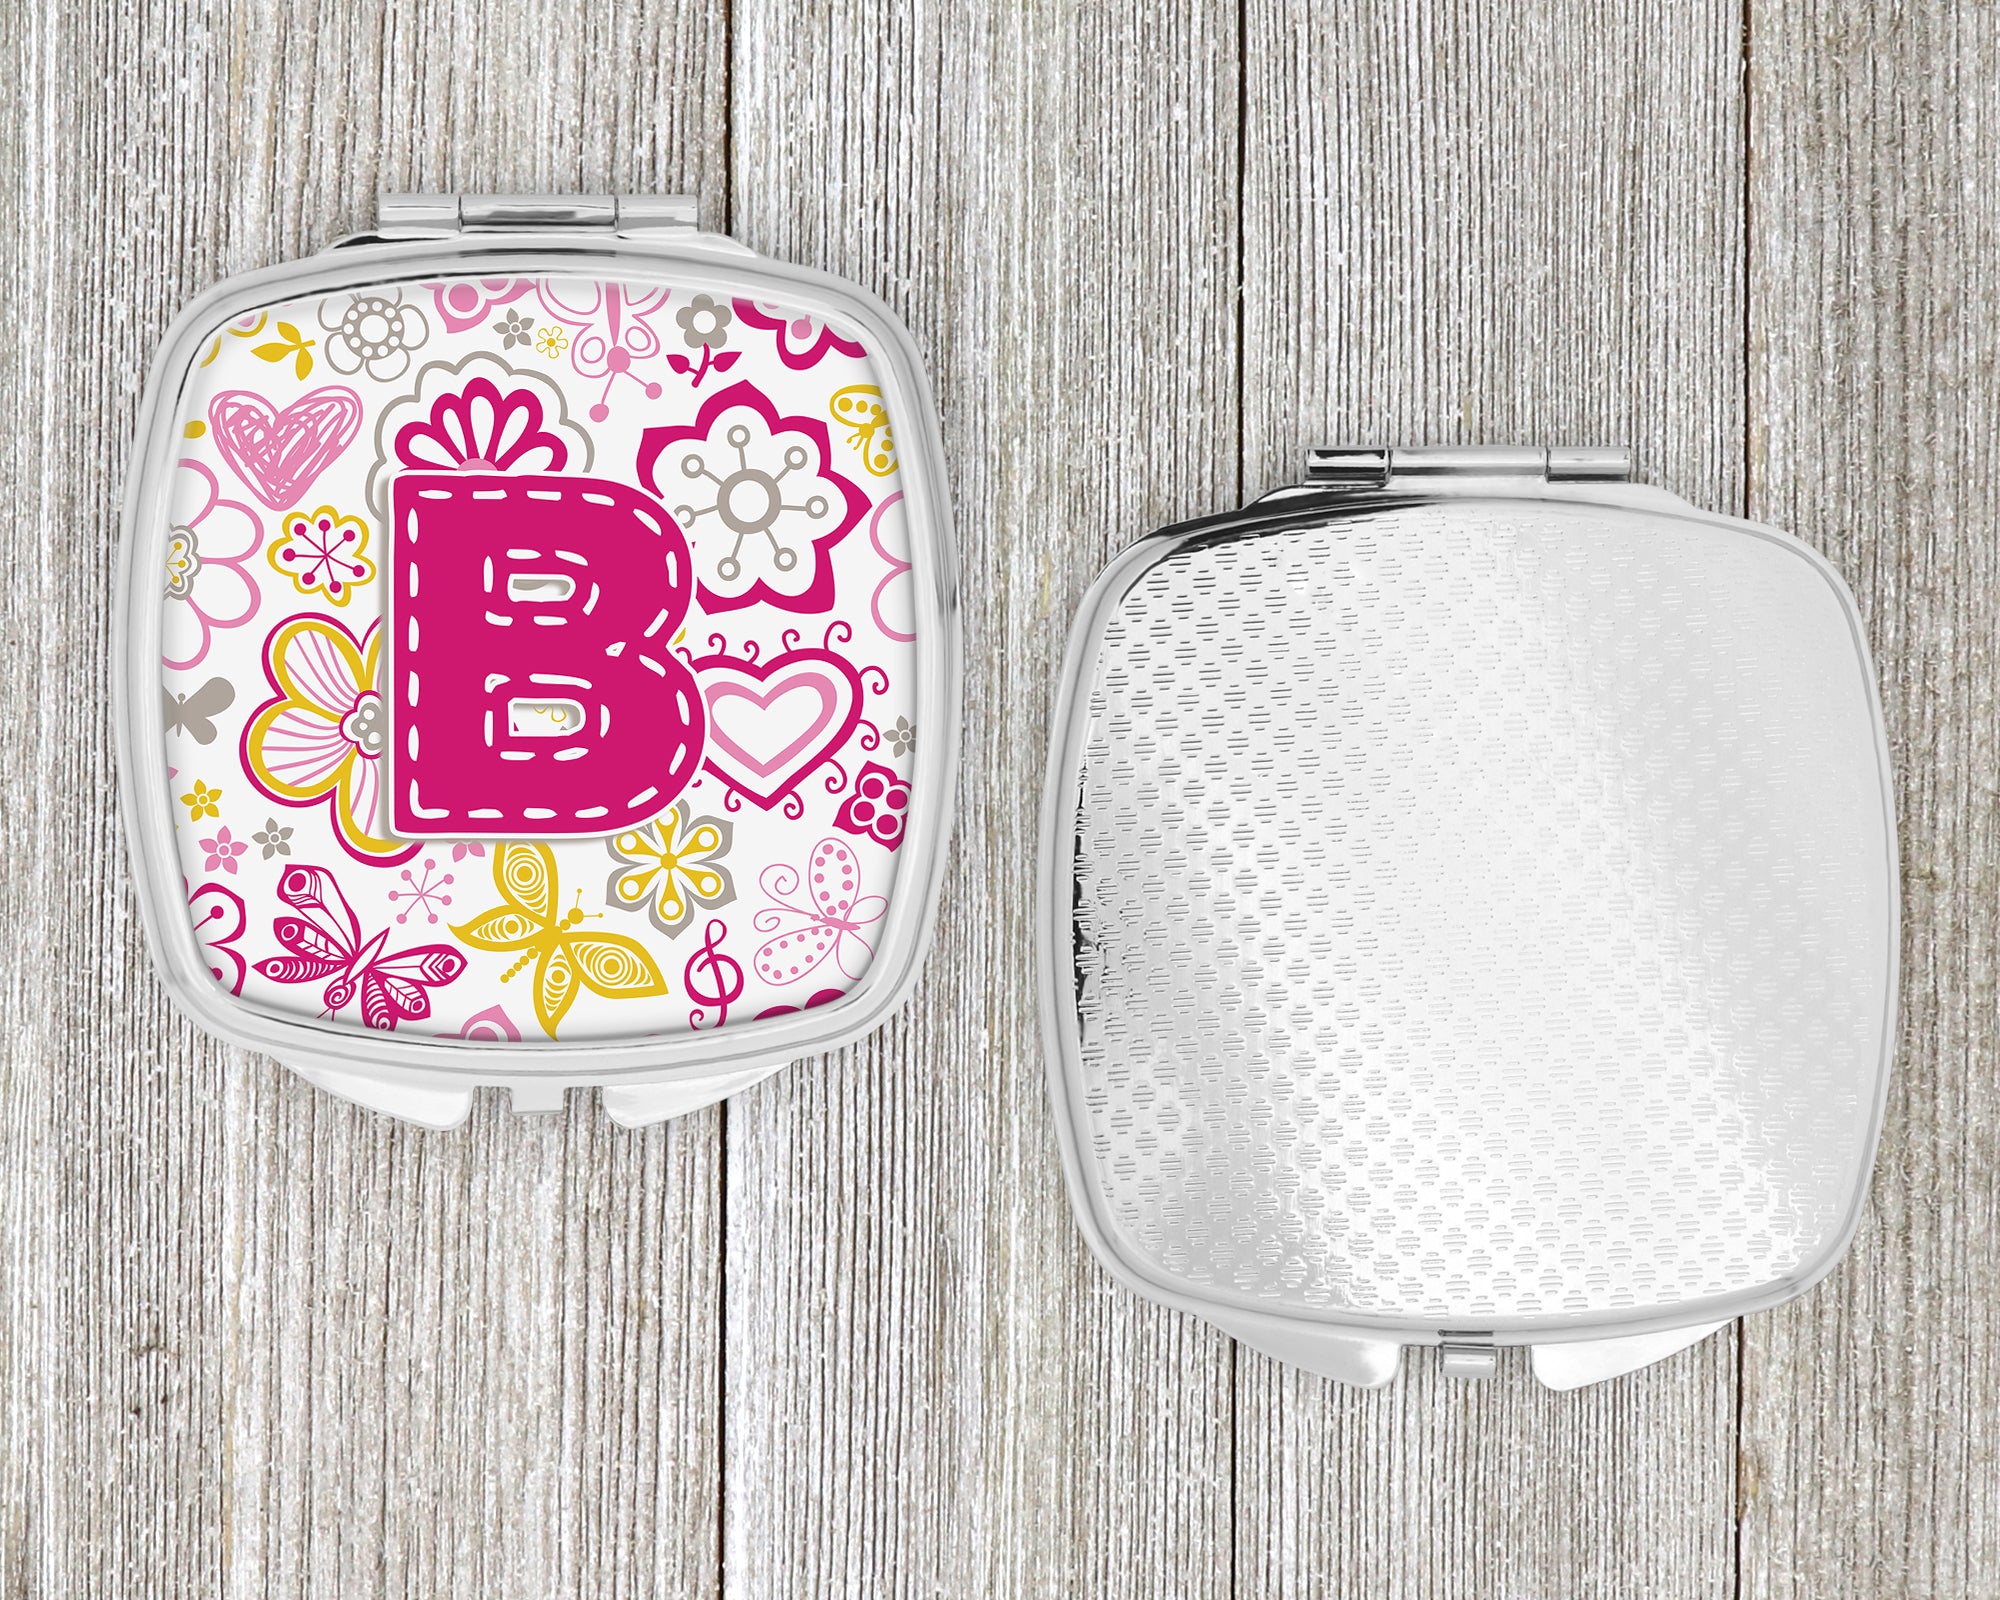 Letter B Flowers and Butterflies Pink Compact Mirror CJ2005-BSCM